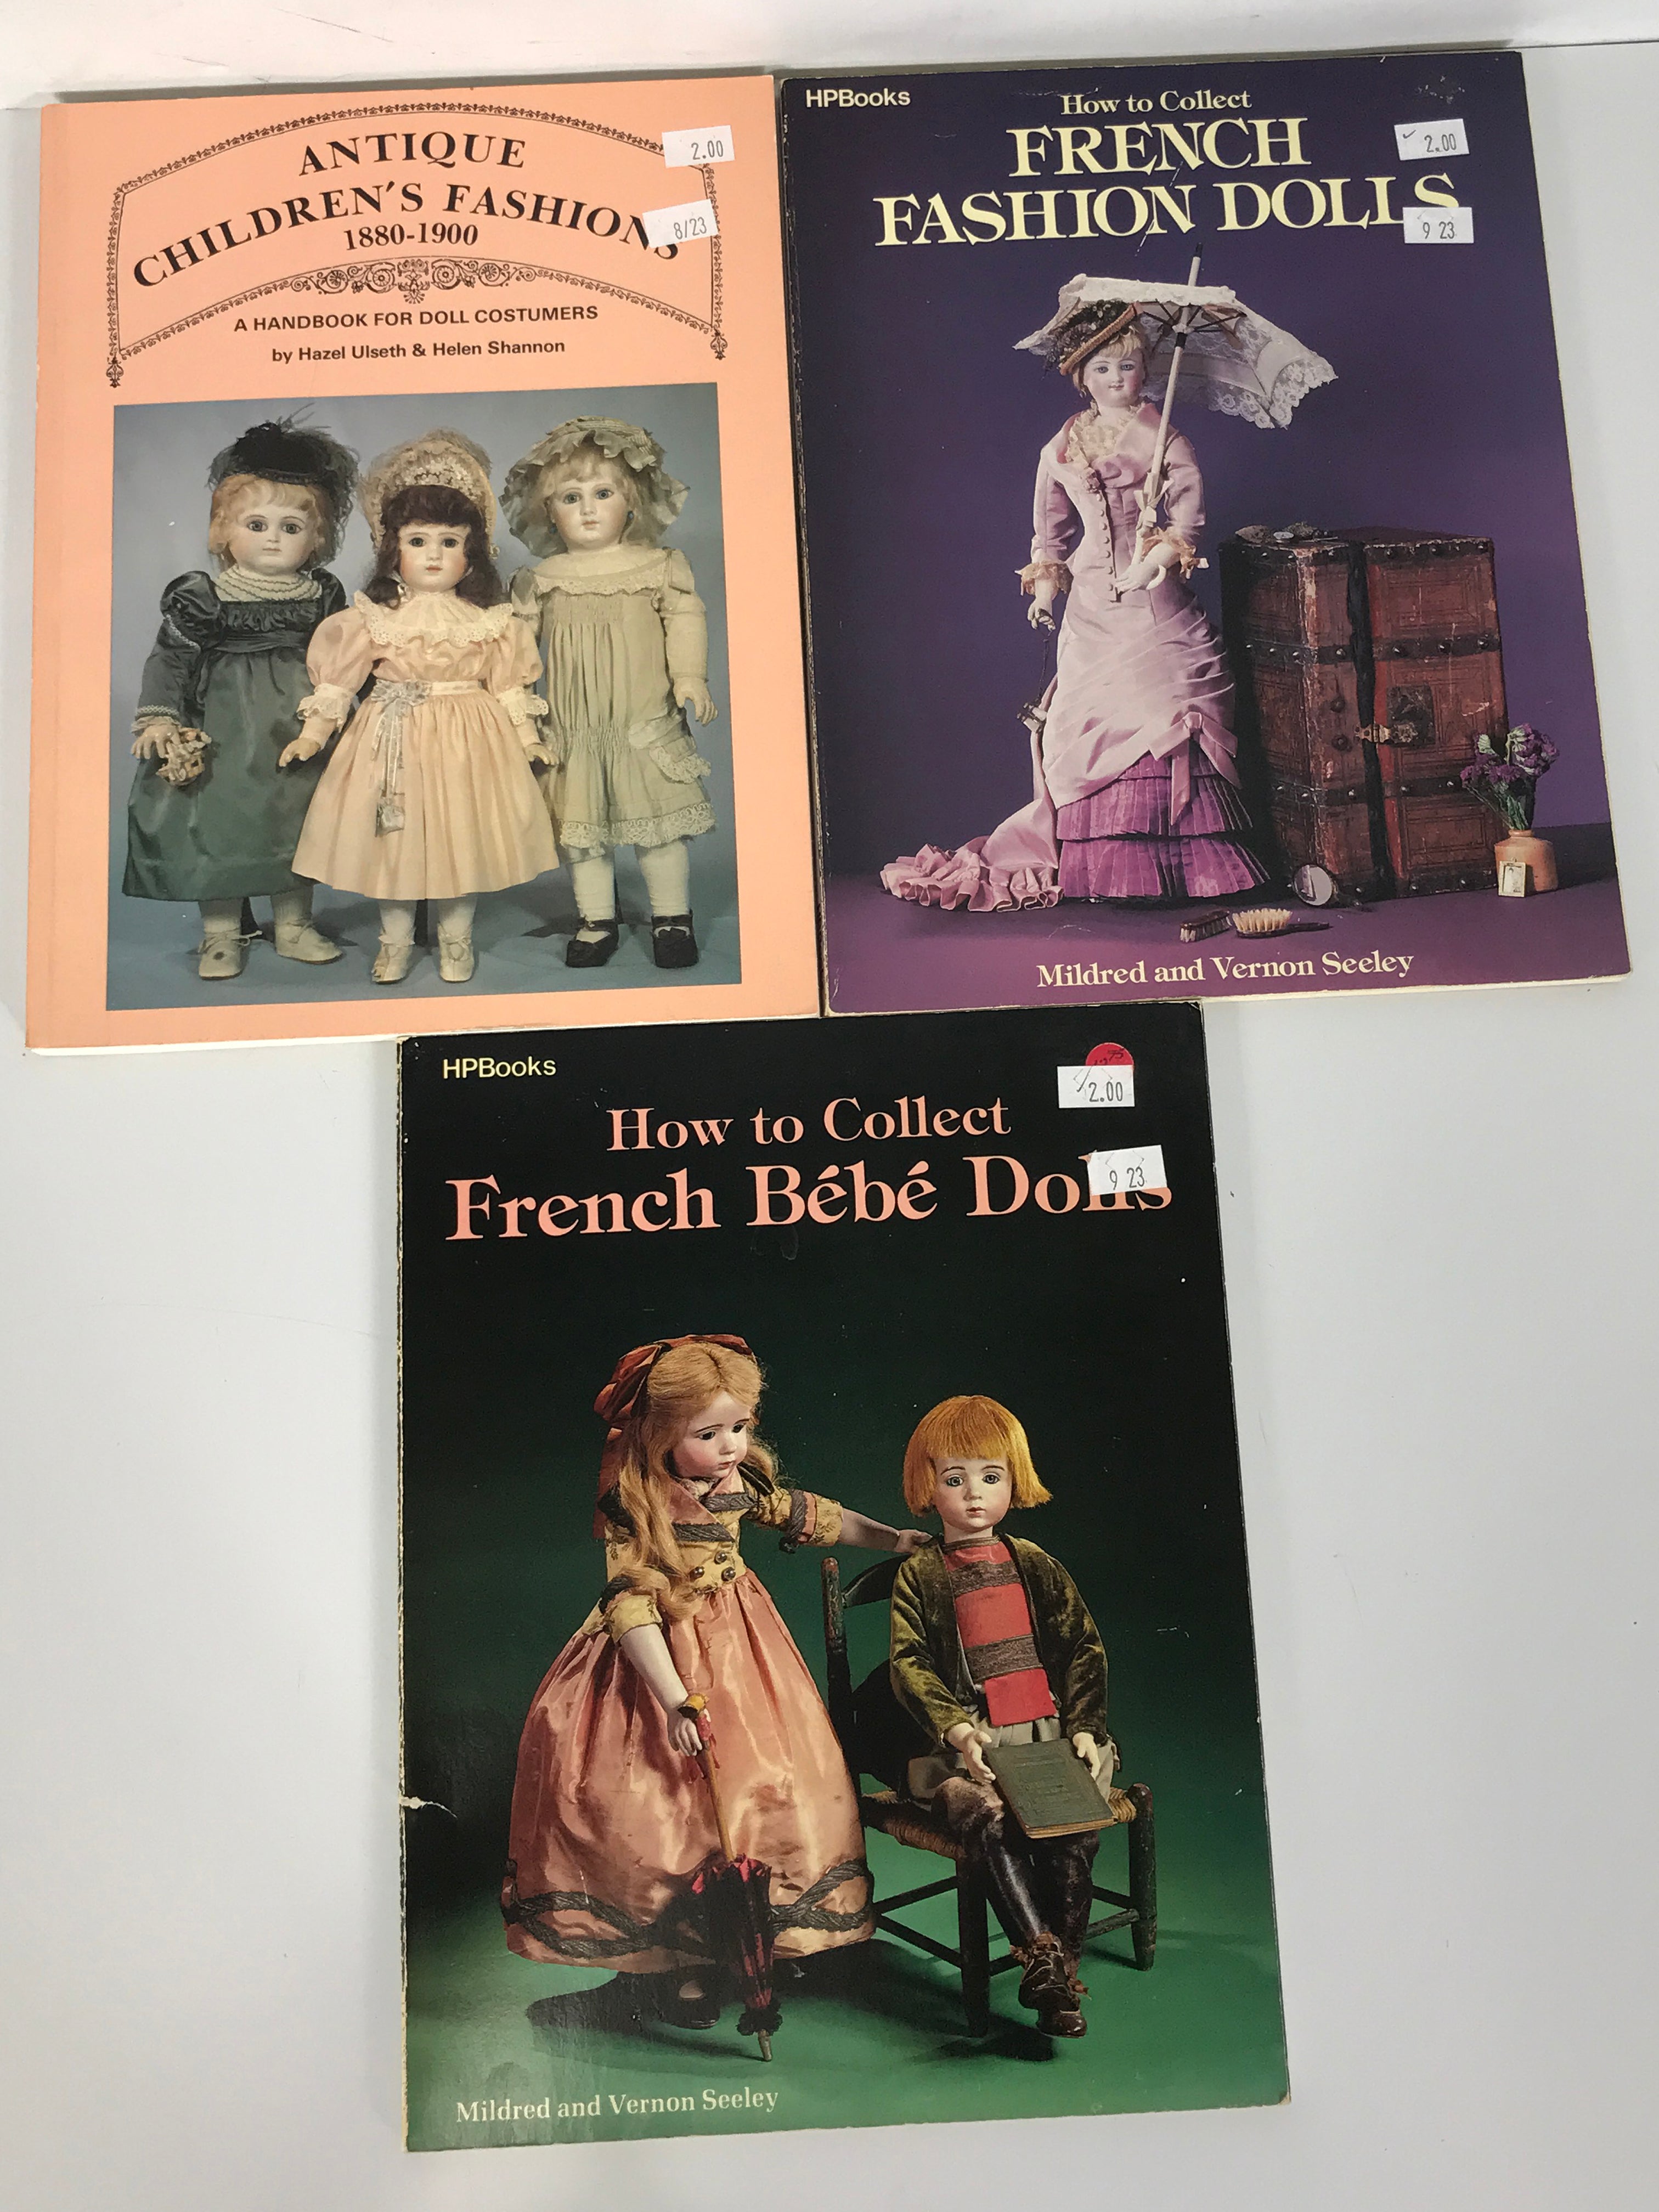 Lot of 3 Doll Collector's Books: French Fashion and Bebe Dolls (Seeley) and Handbook for Doll Costumes With Patterns (Ulseth & Shannon)